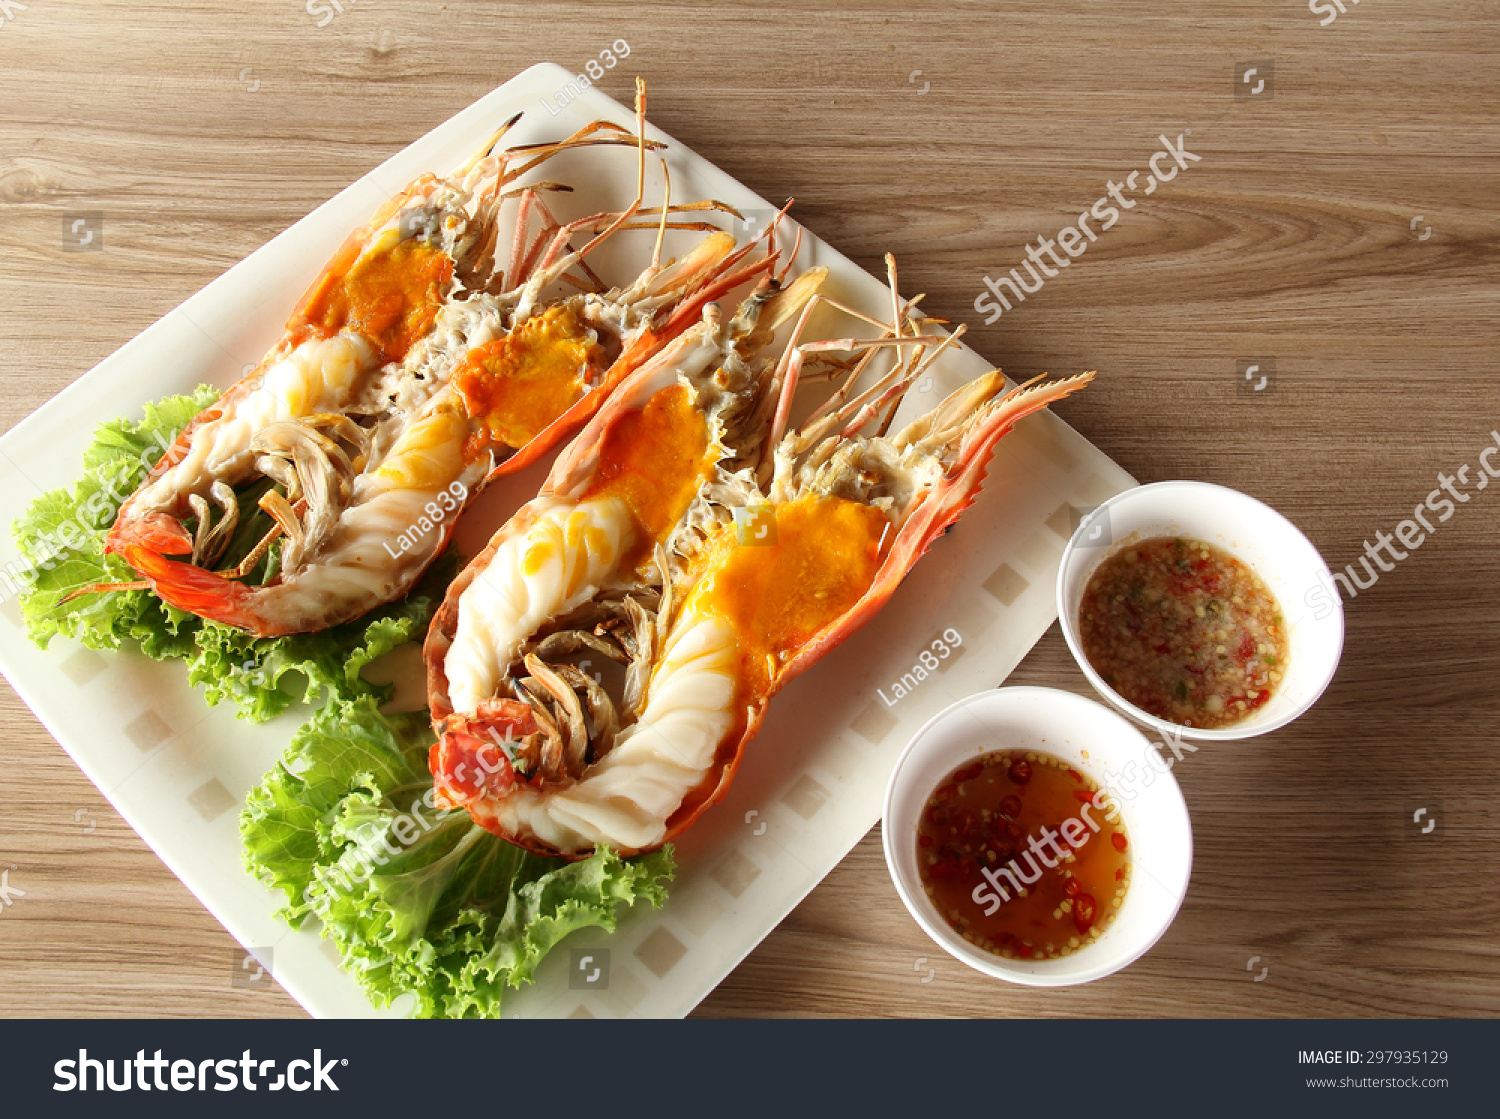 Grilled Giant River Prawn Stock Photo 297935129 : Shutterstock